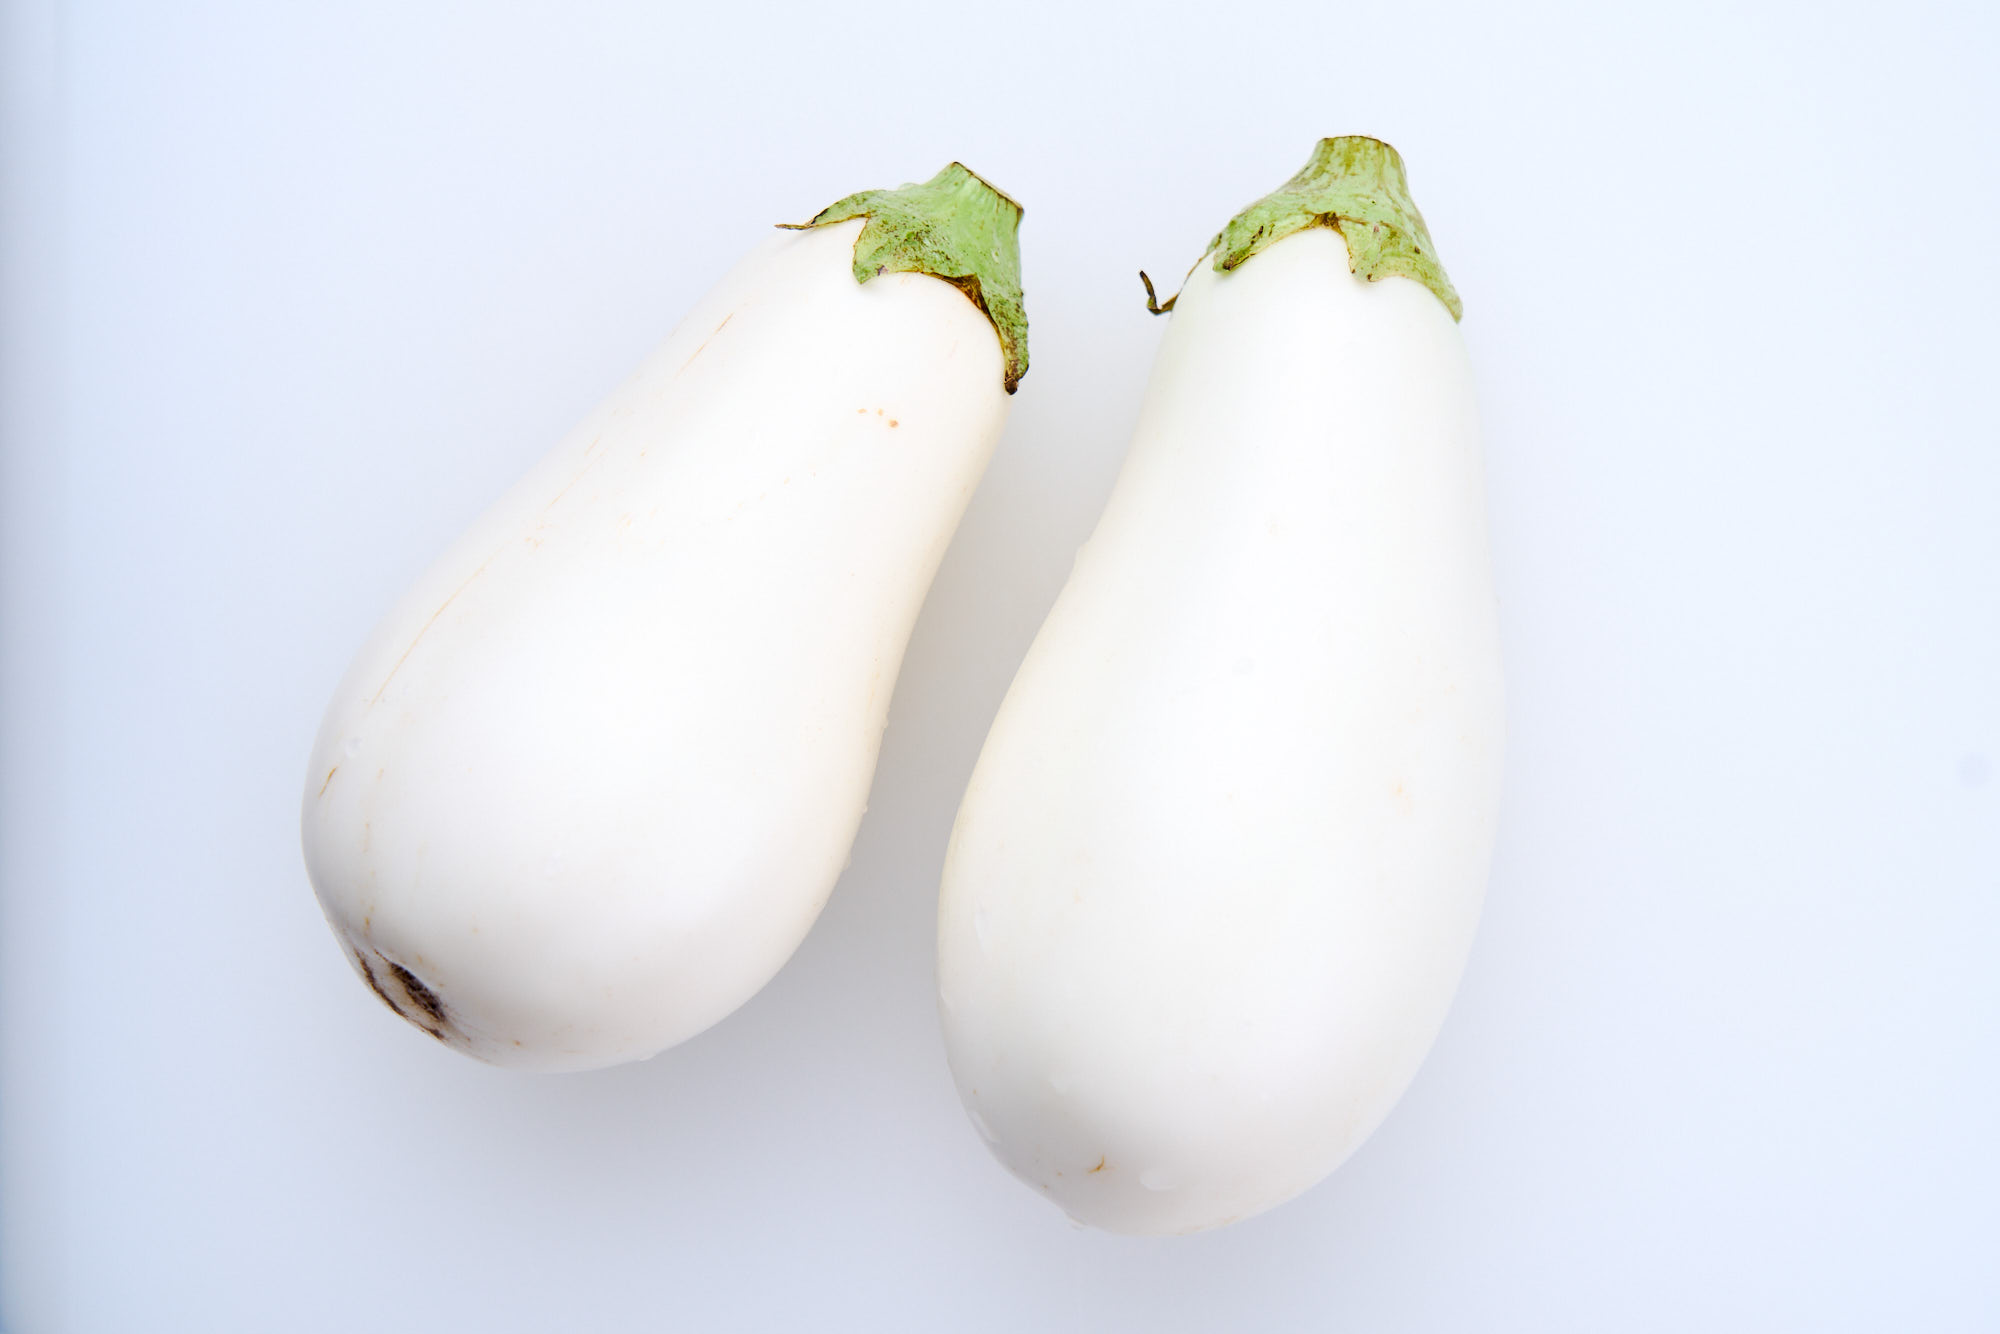 White eggplant for White Eggplant Steak with Butter Soy Sauce